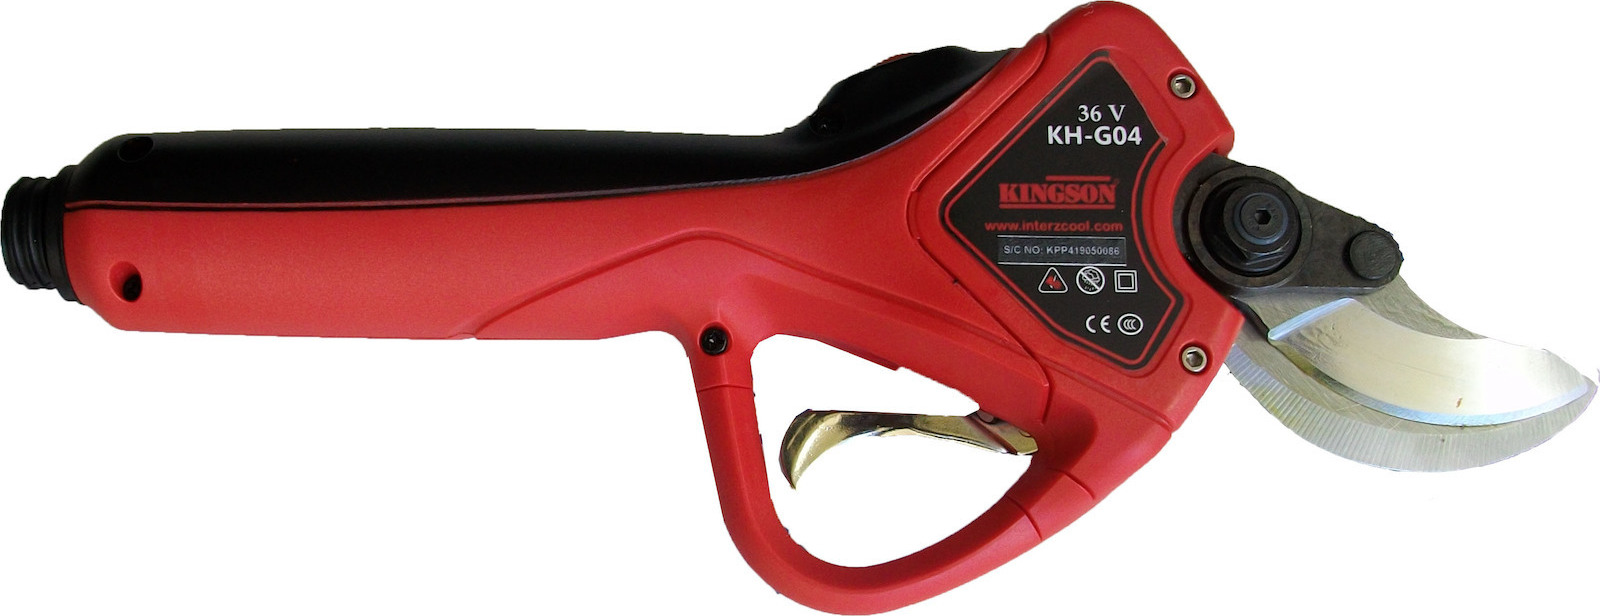 Dimopanas - KINGSON KH-G04 BATTERY PRUNING SHEAR WITH TOUCH PROTECTION